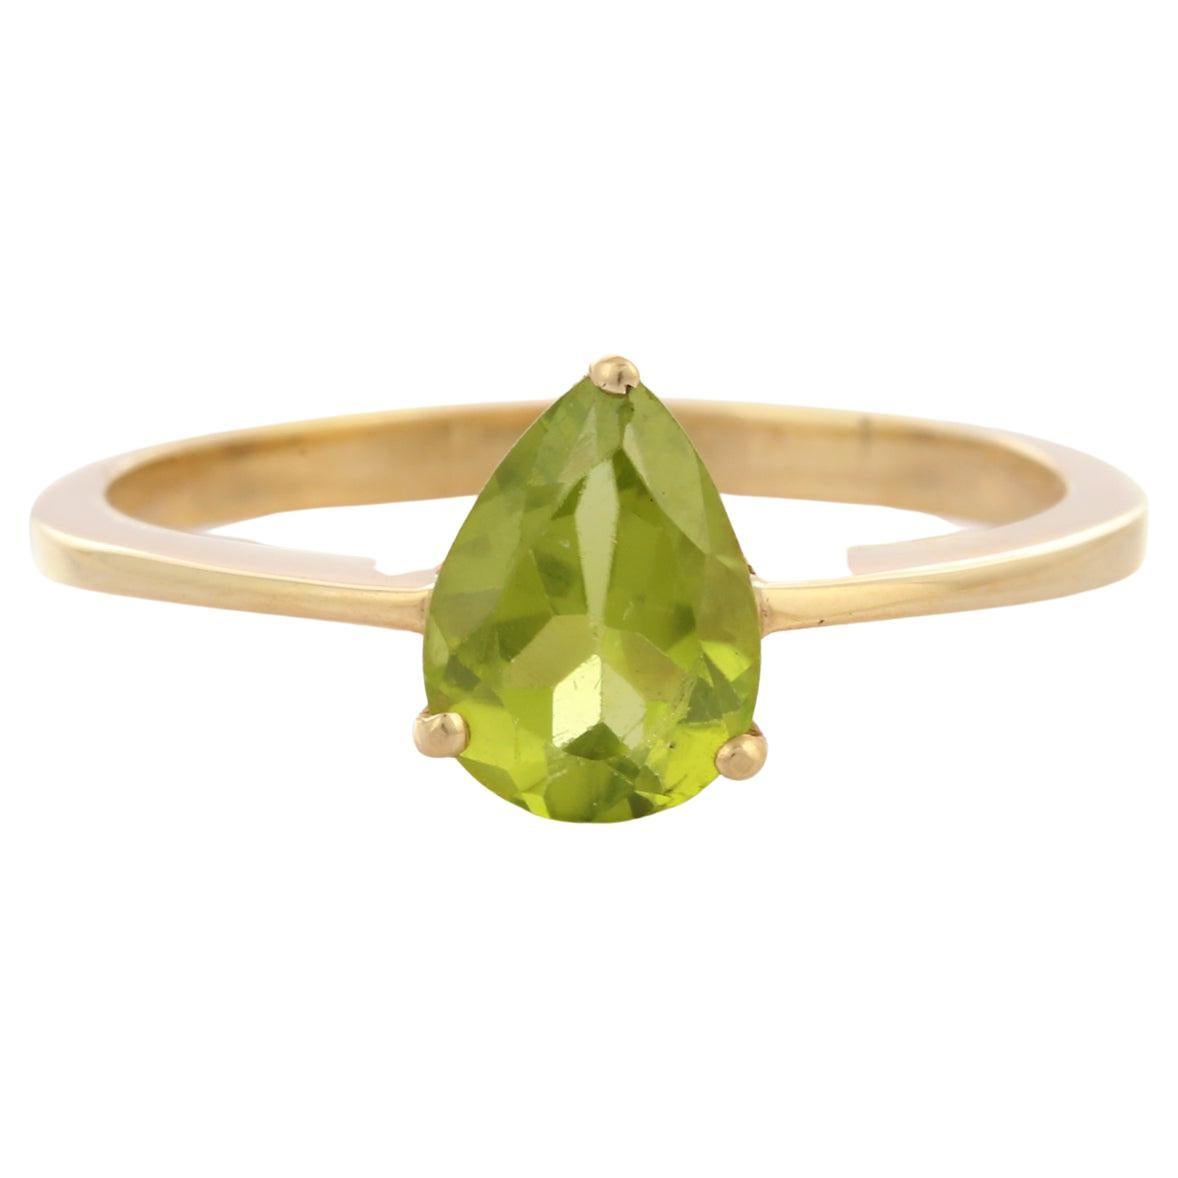 For Sale:  Pear Cut Peridot Solitaire Ring in 14K Yellow Gold